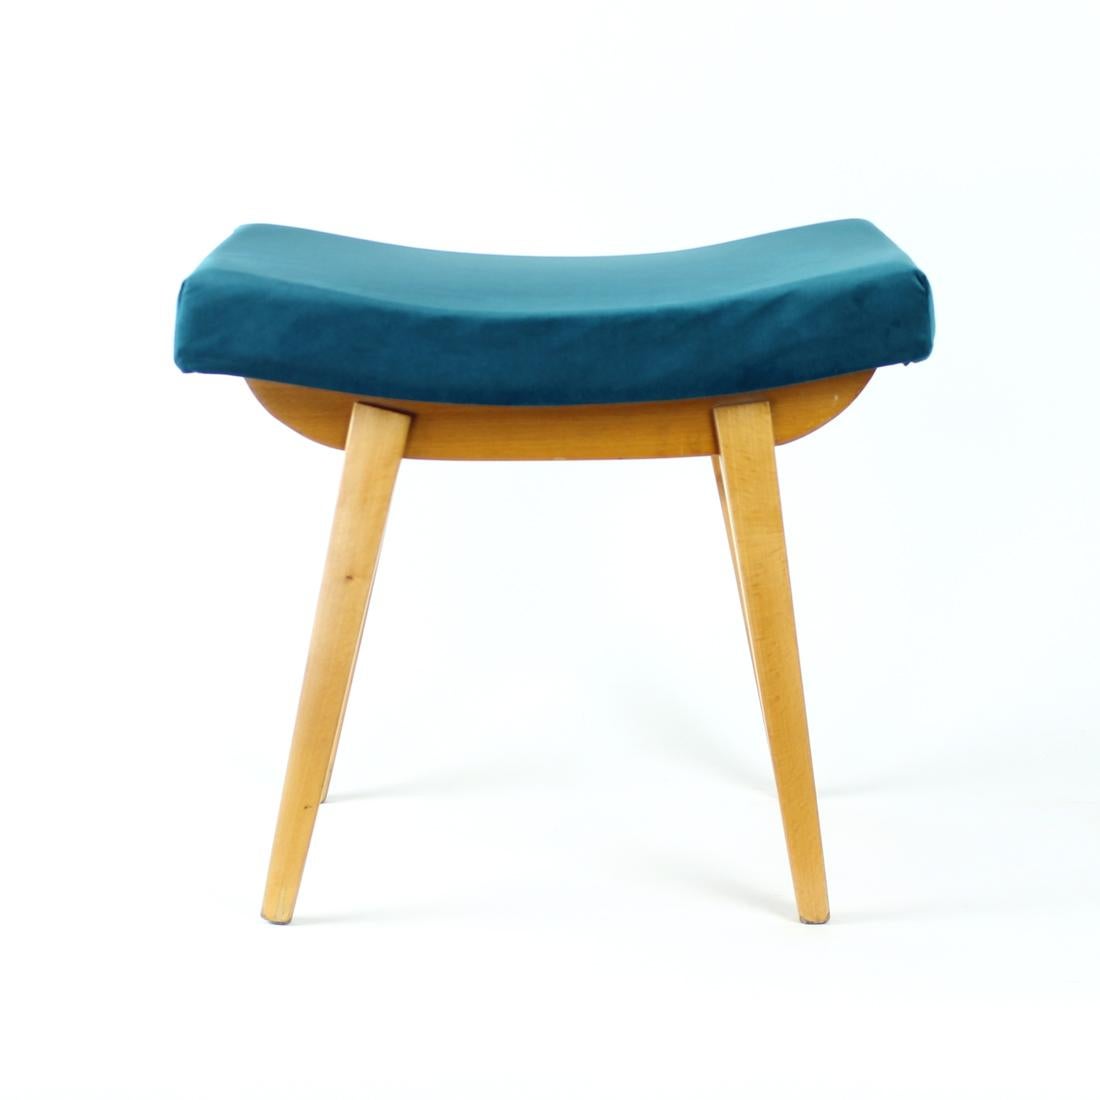 Beautiful foot stool from Mid-century modern period of Czechoslovakian design. Produced by TON company in 1960s. Made of beautiful oak wood with lovely details. Fully restored with restored wood and new upholstery. The seat is upholstered in magic